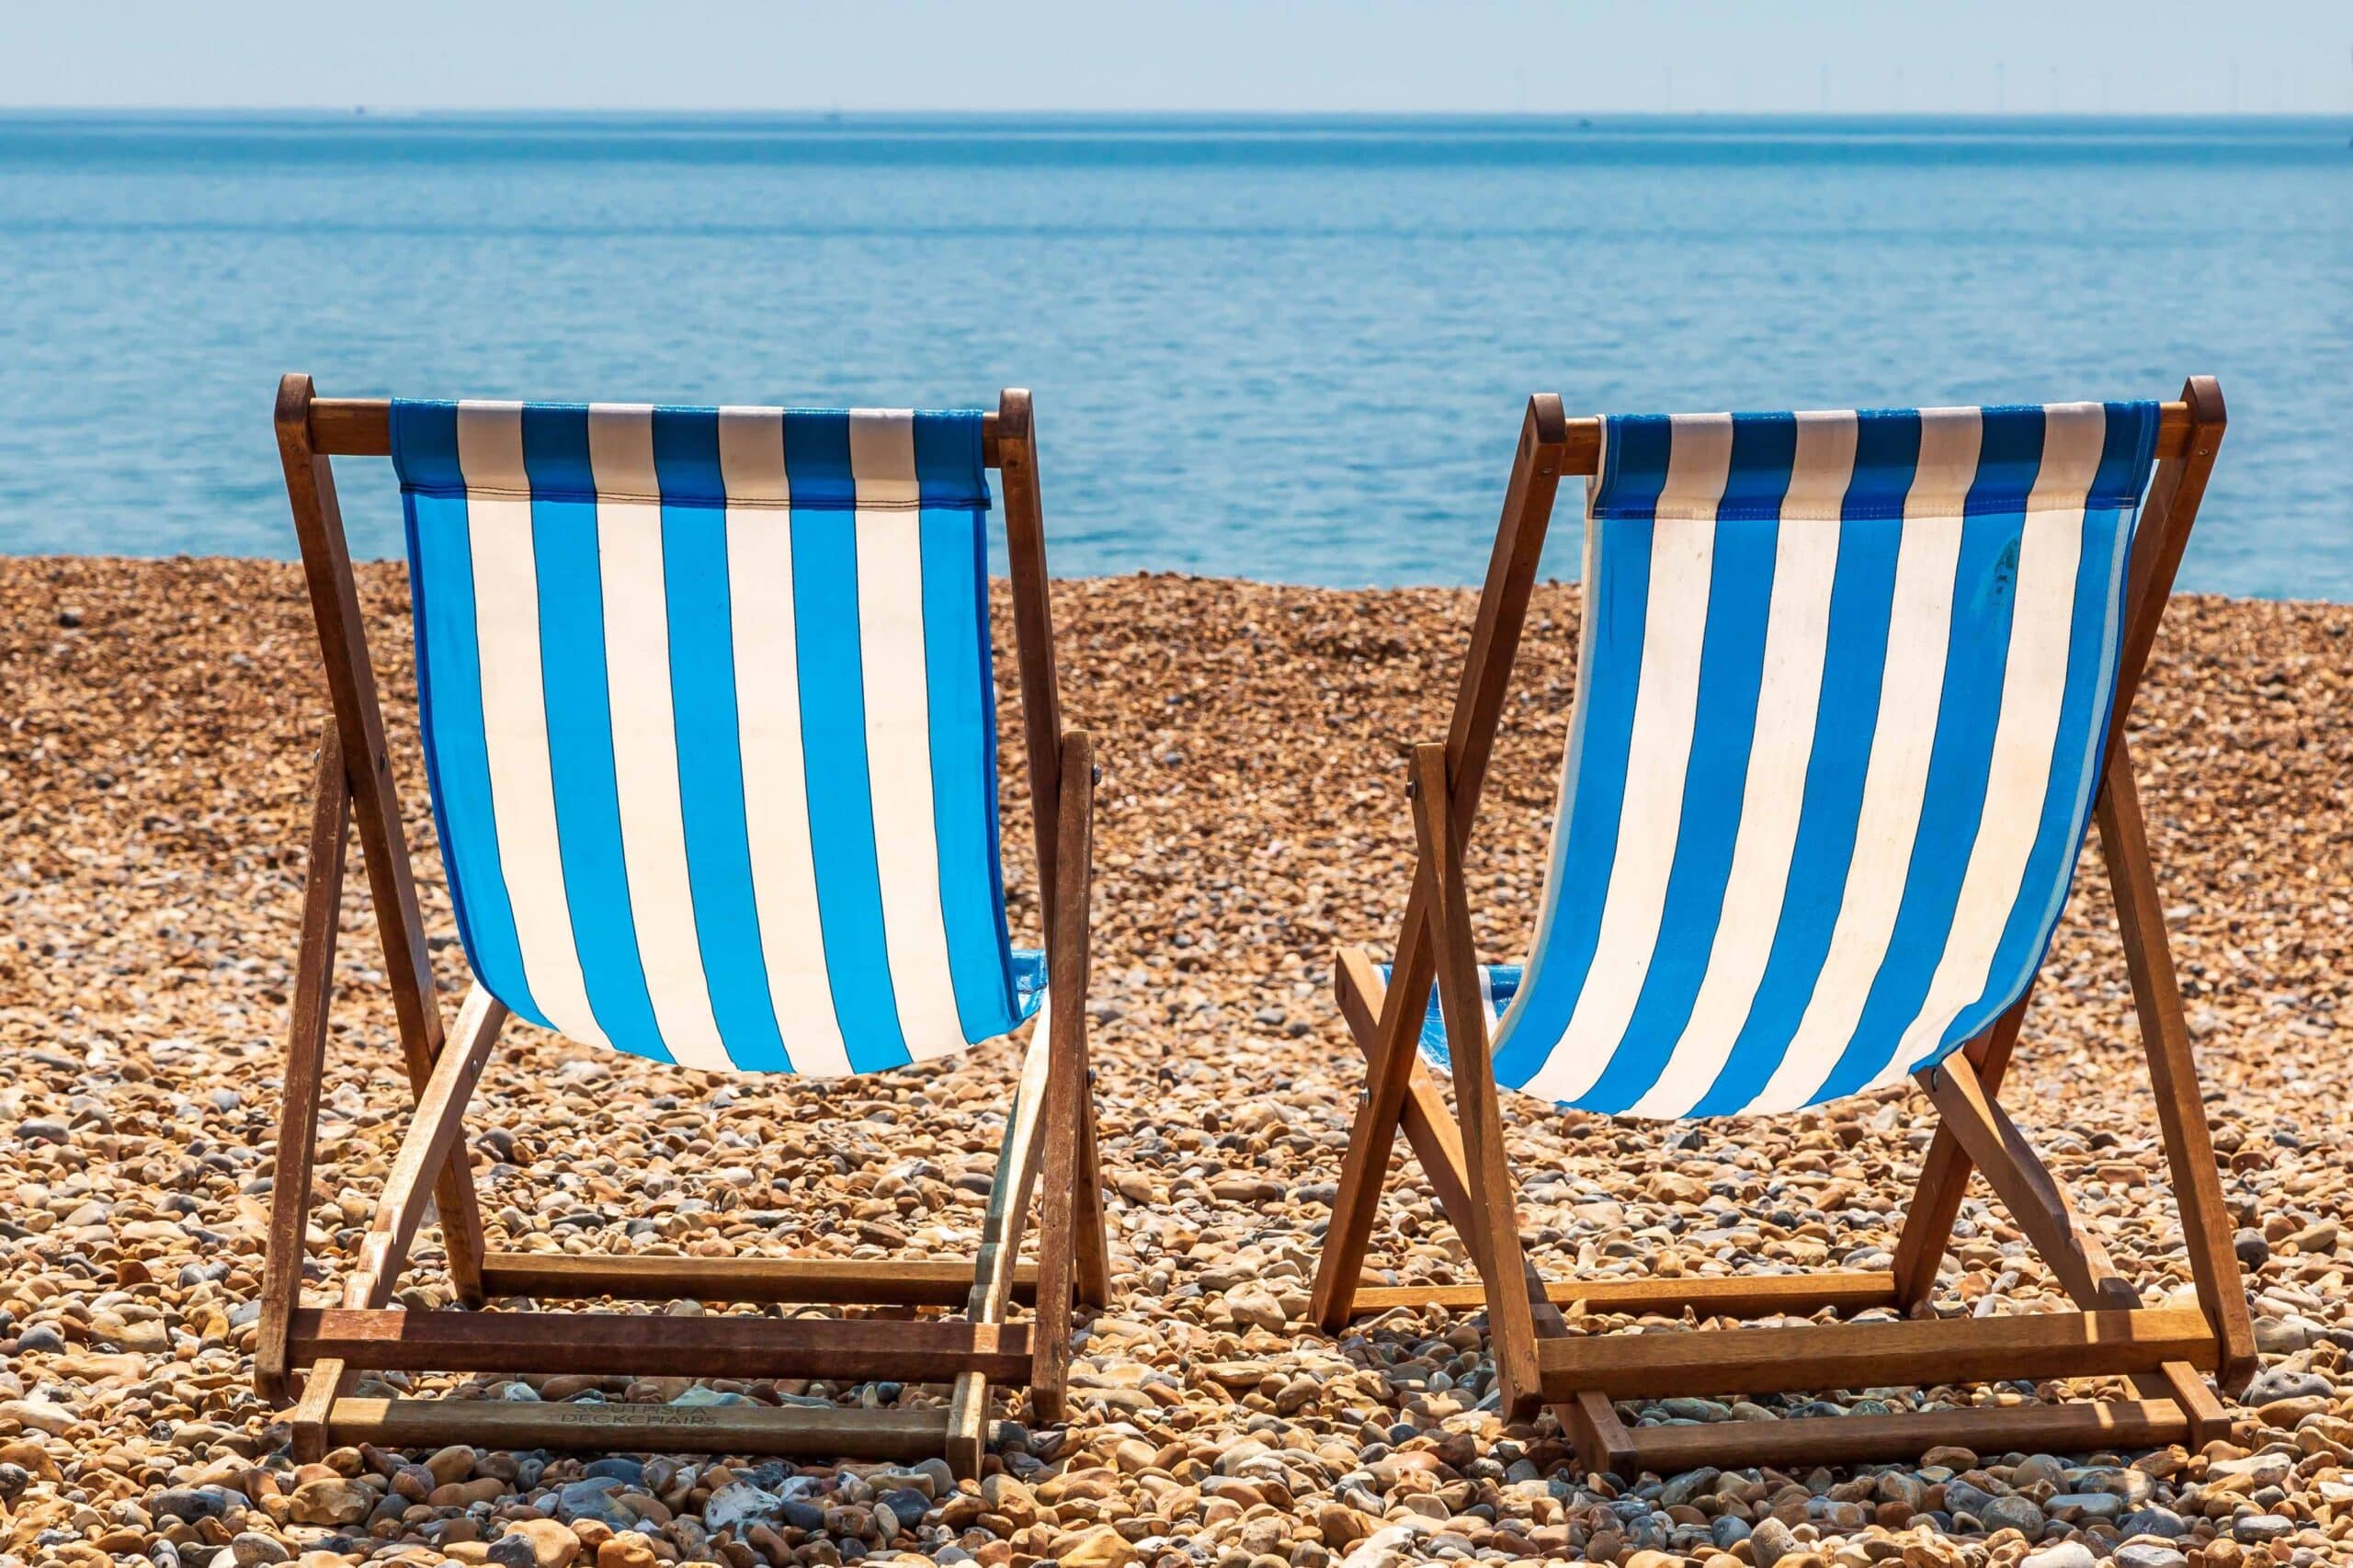 Two empty wooden deck chairs, blue and white striped fabric, on brighton Beach, on a sunny summer's day